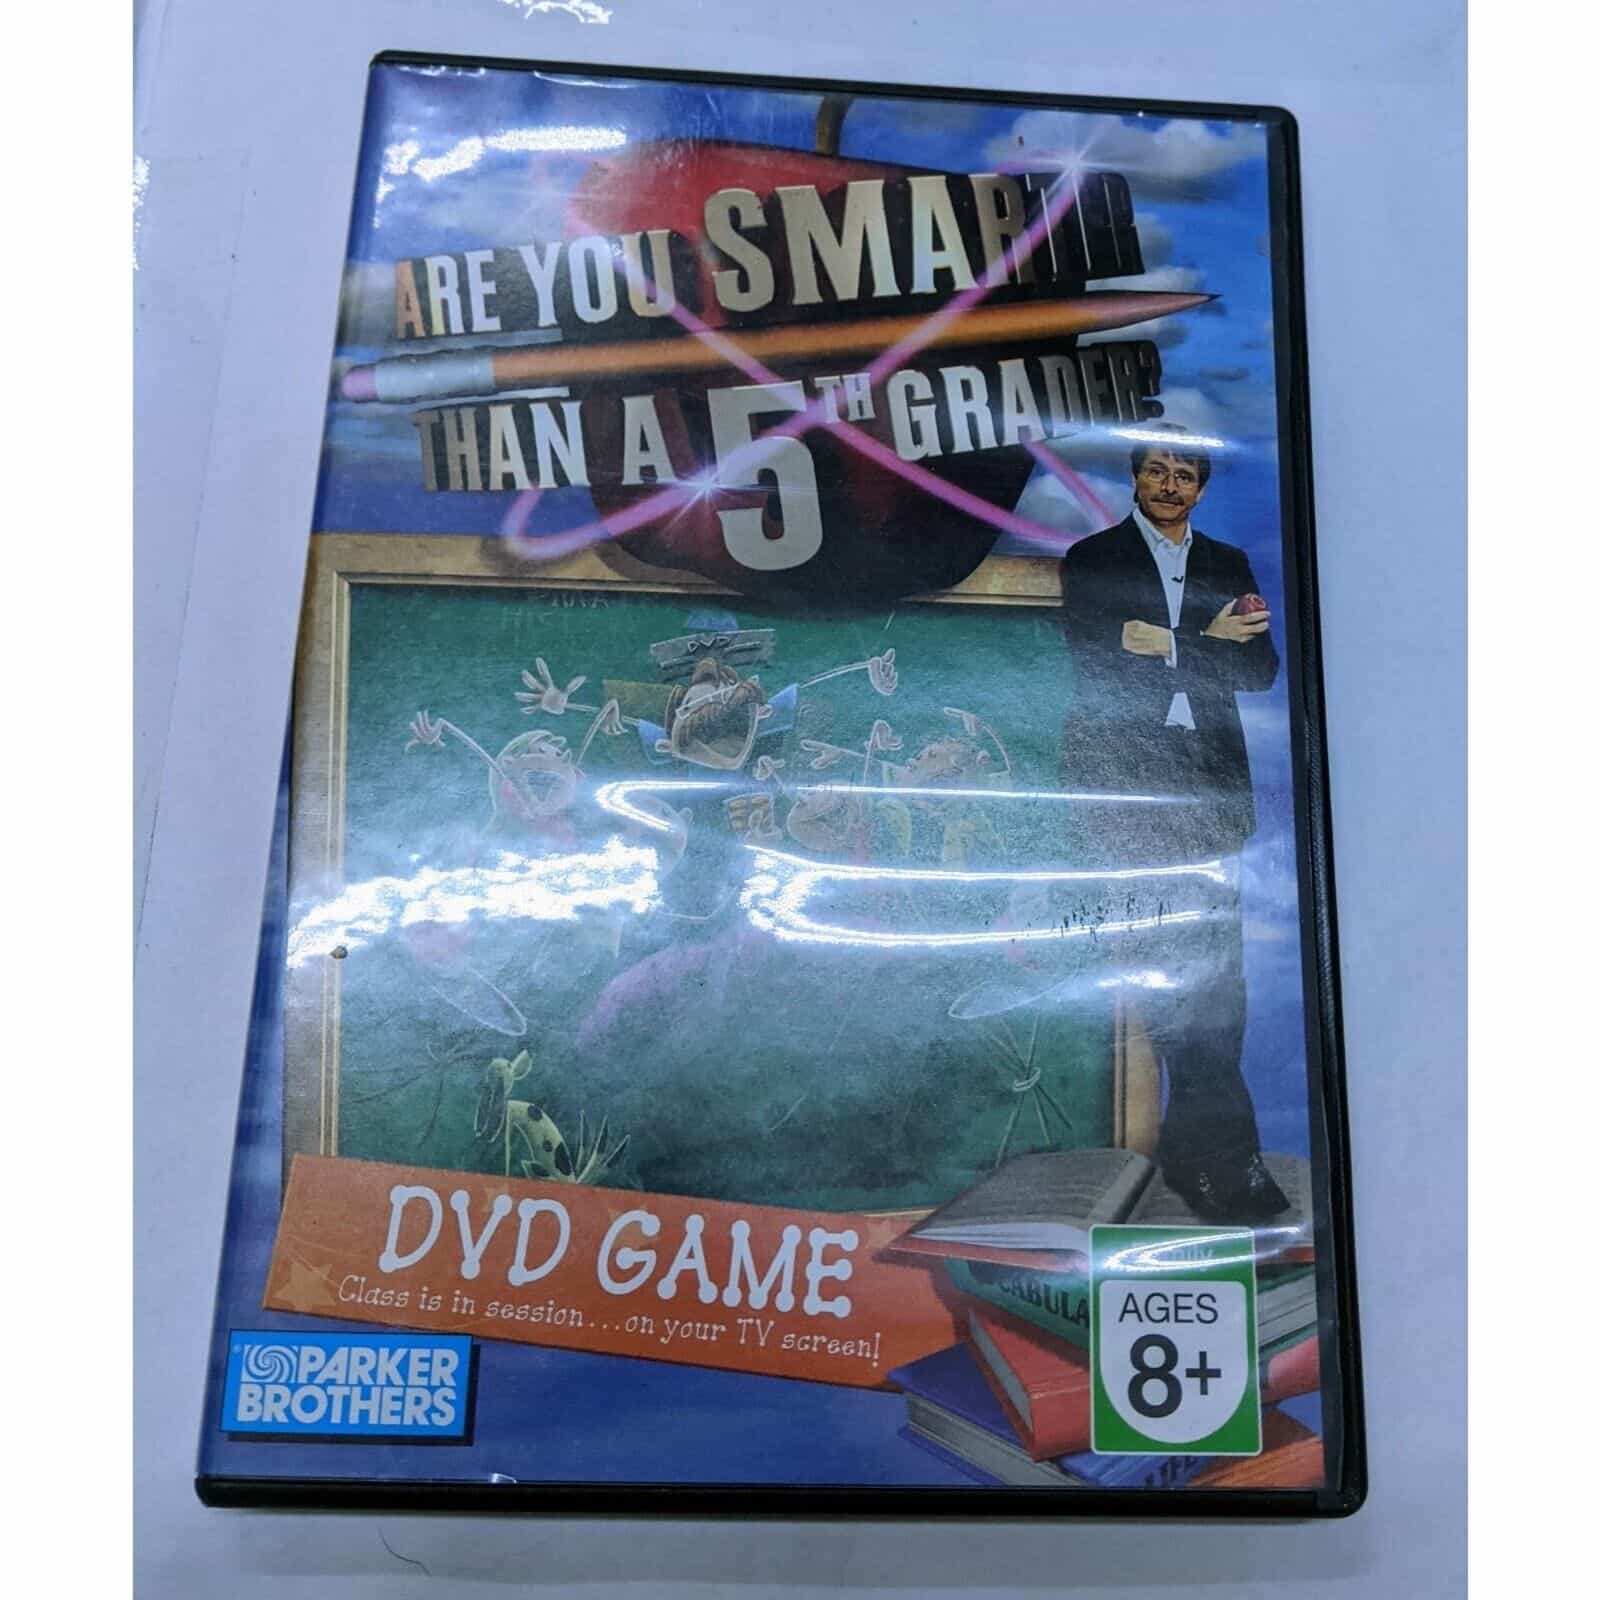 Are You Smarter Than A 5th Grader? DVD Game